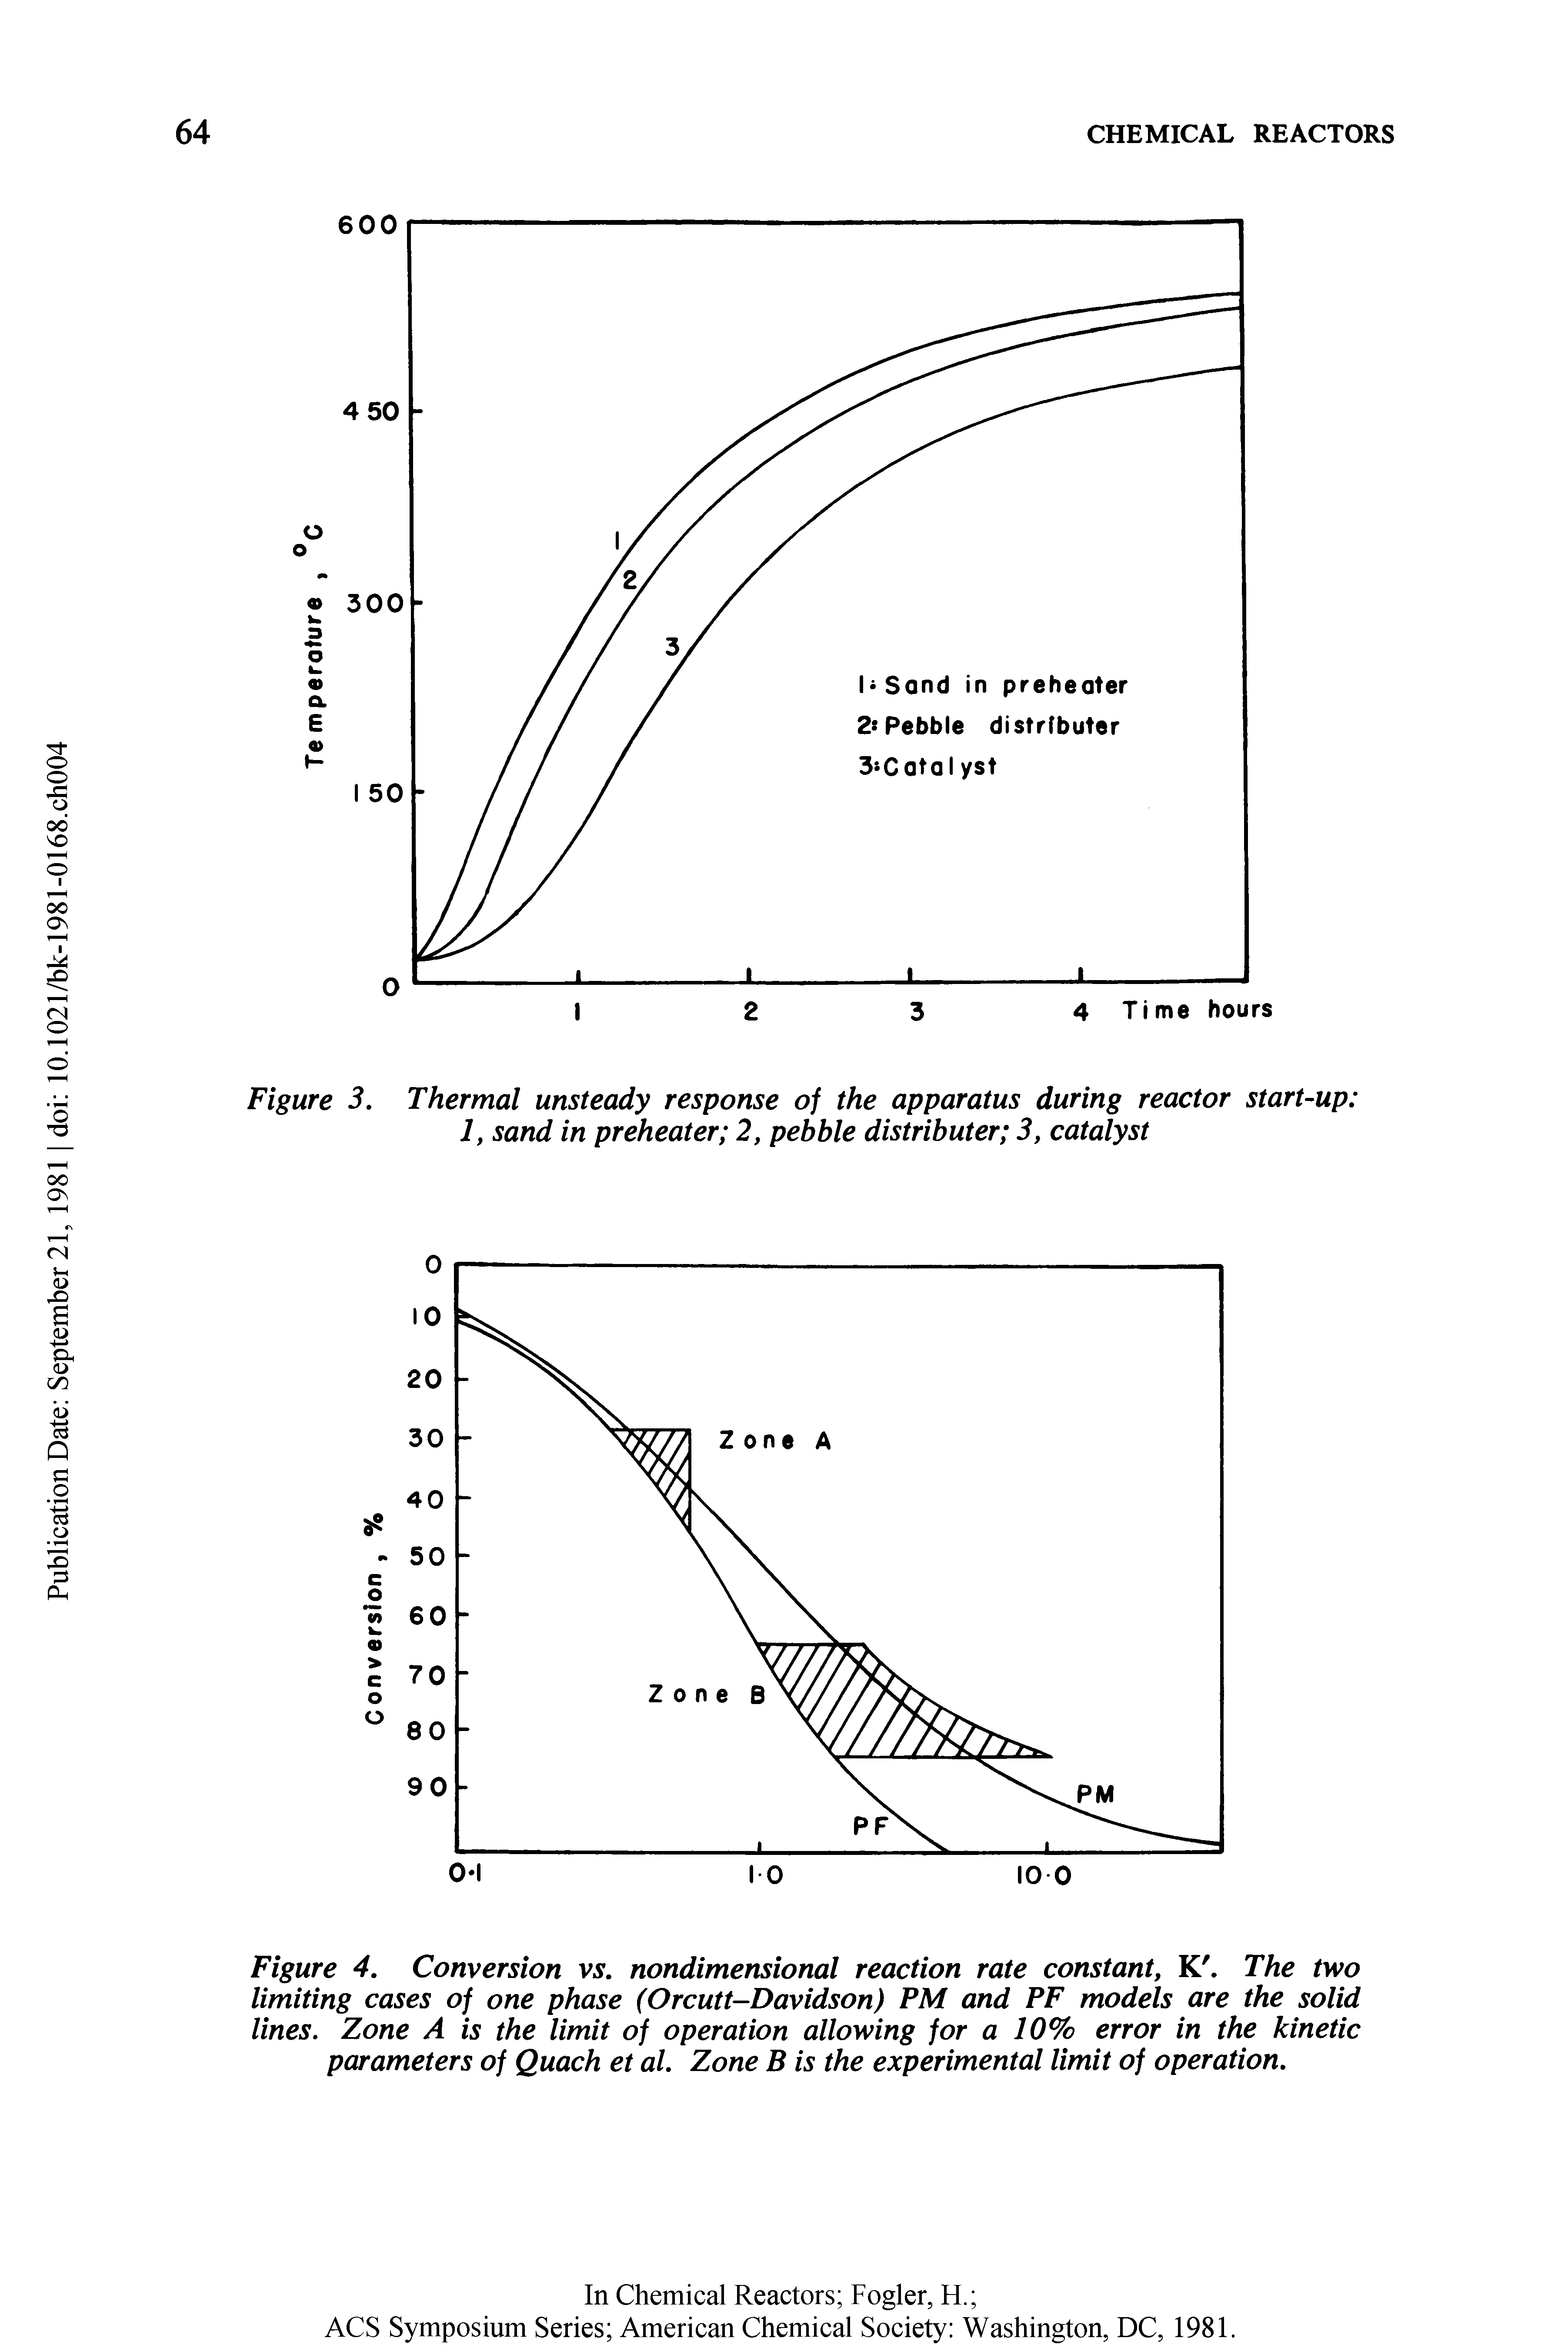 Figure 3. Thermal unsteady response of the apparatus during reactor start-up 1, sand in preheater 2, pebble distributer 3, catalyst...